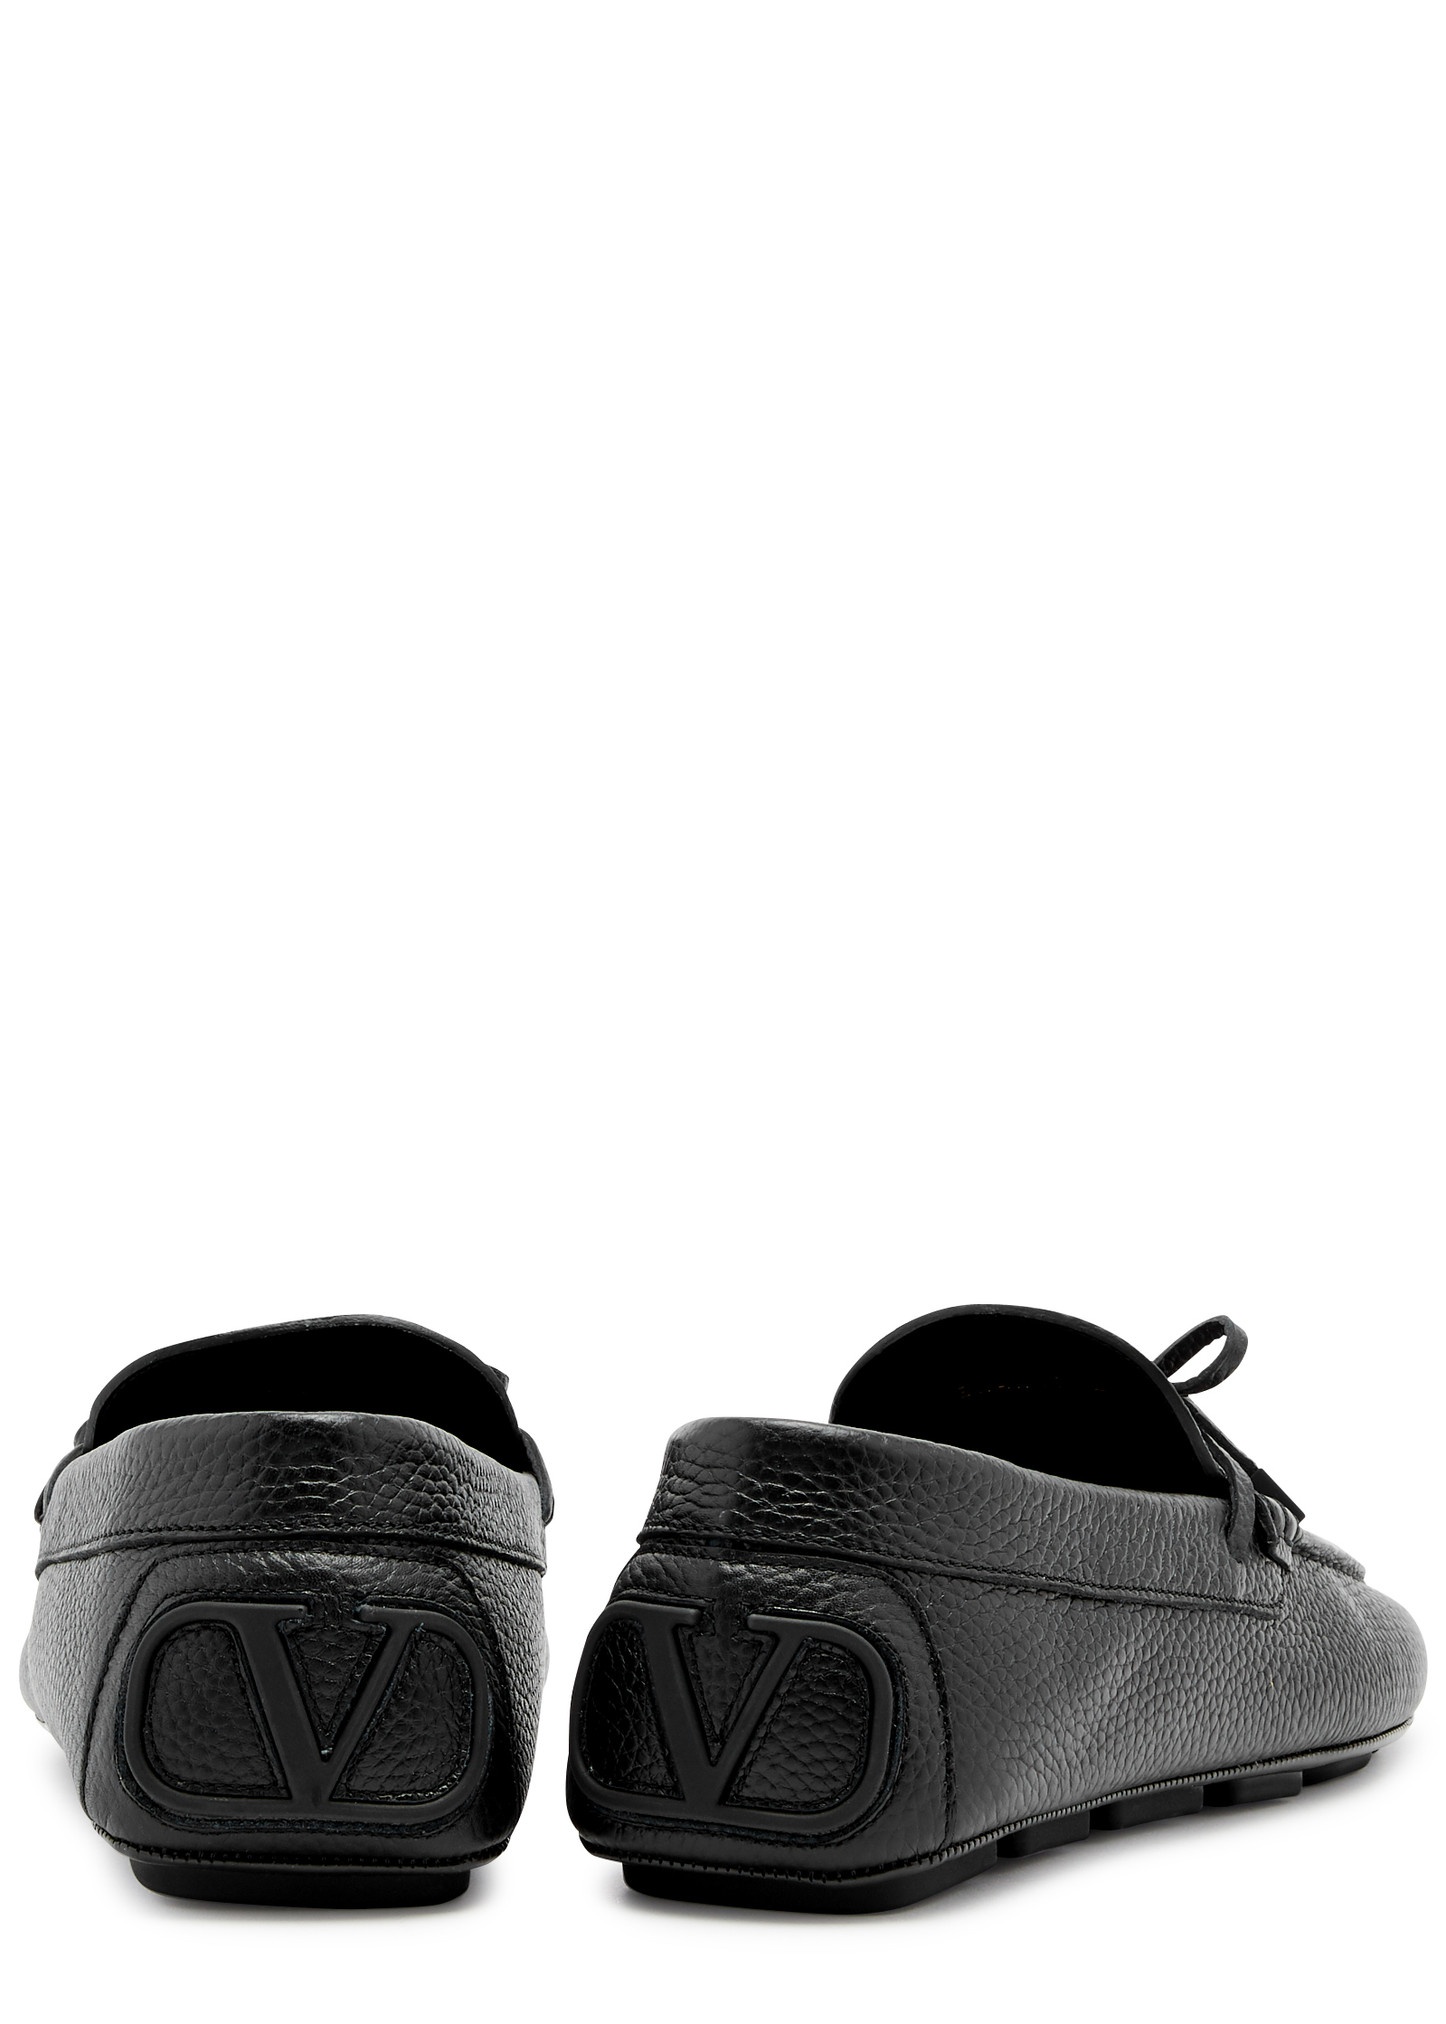 VLogo grained leather driving shoes - 3